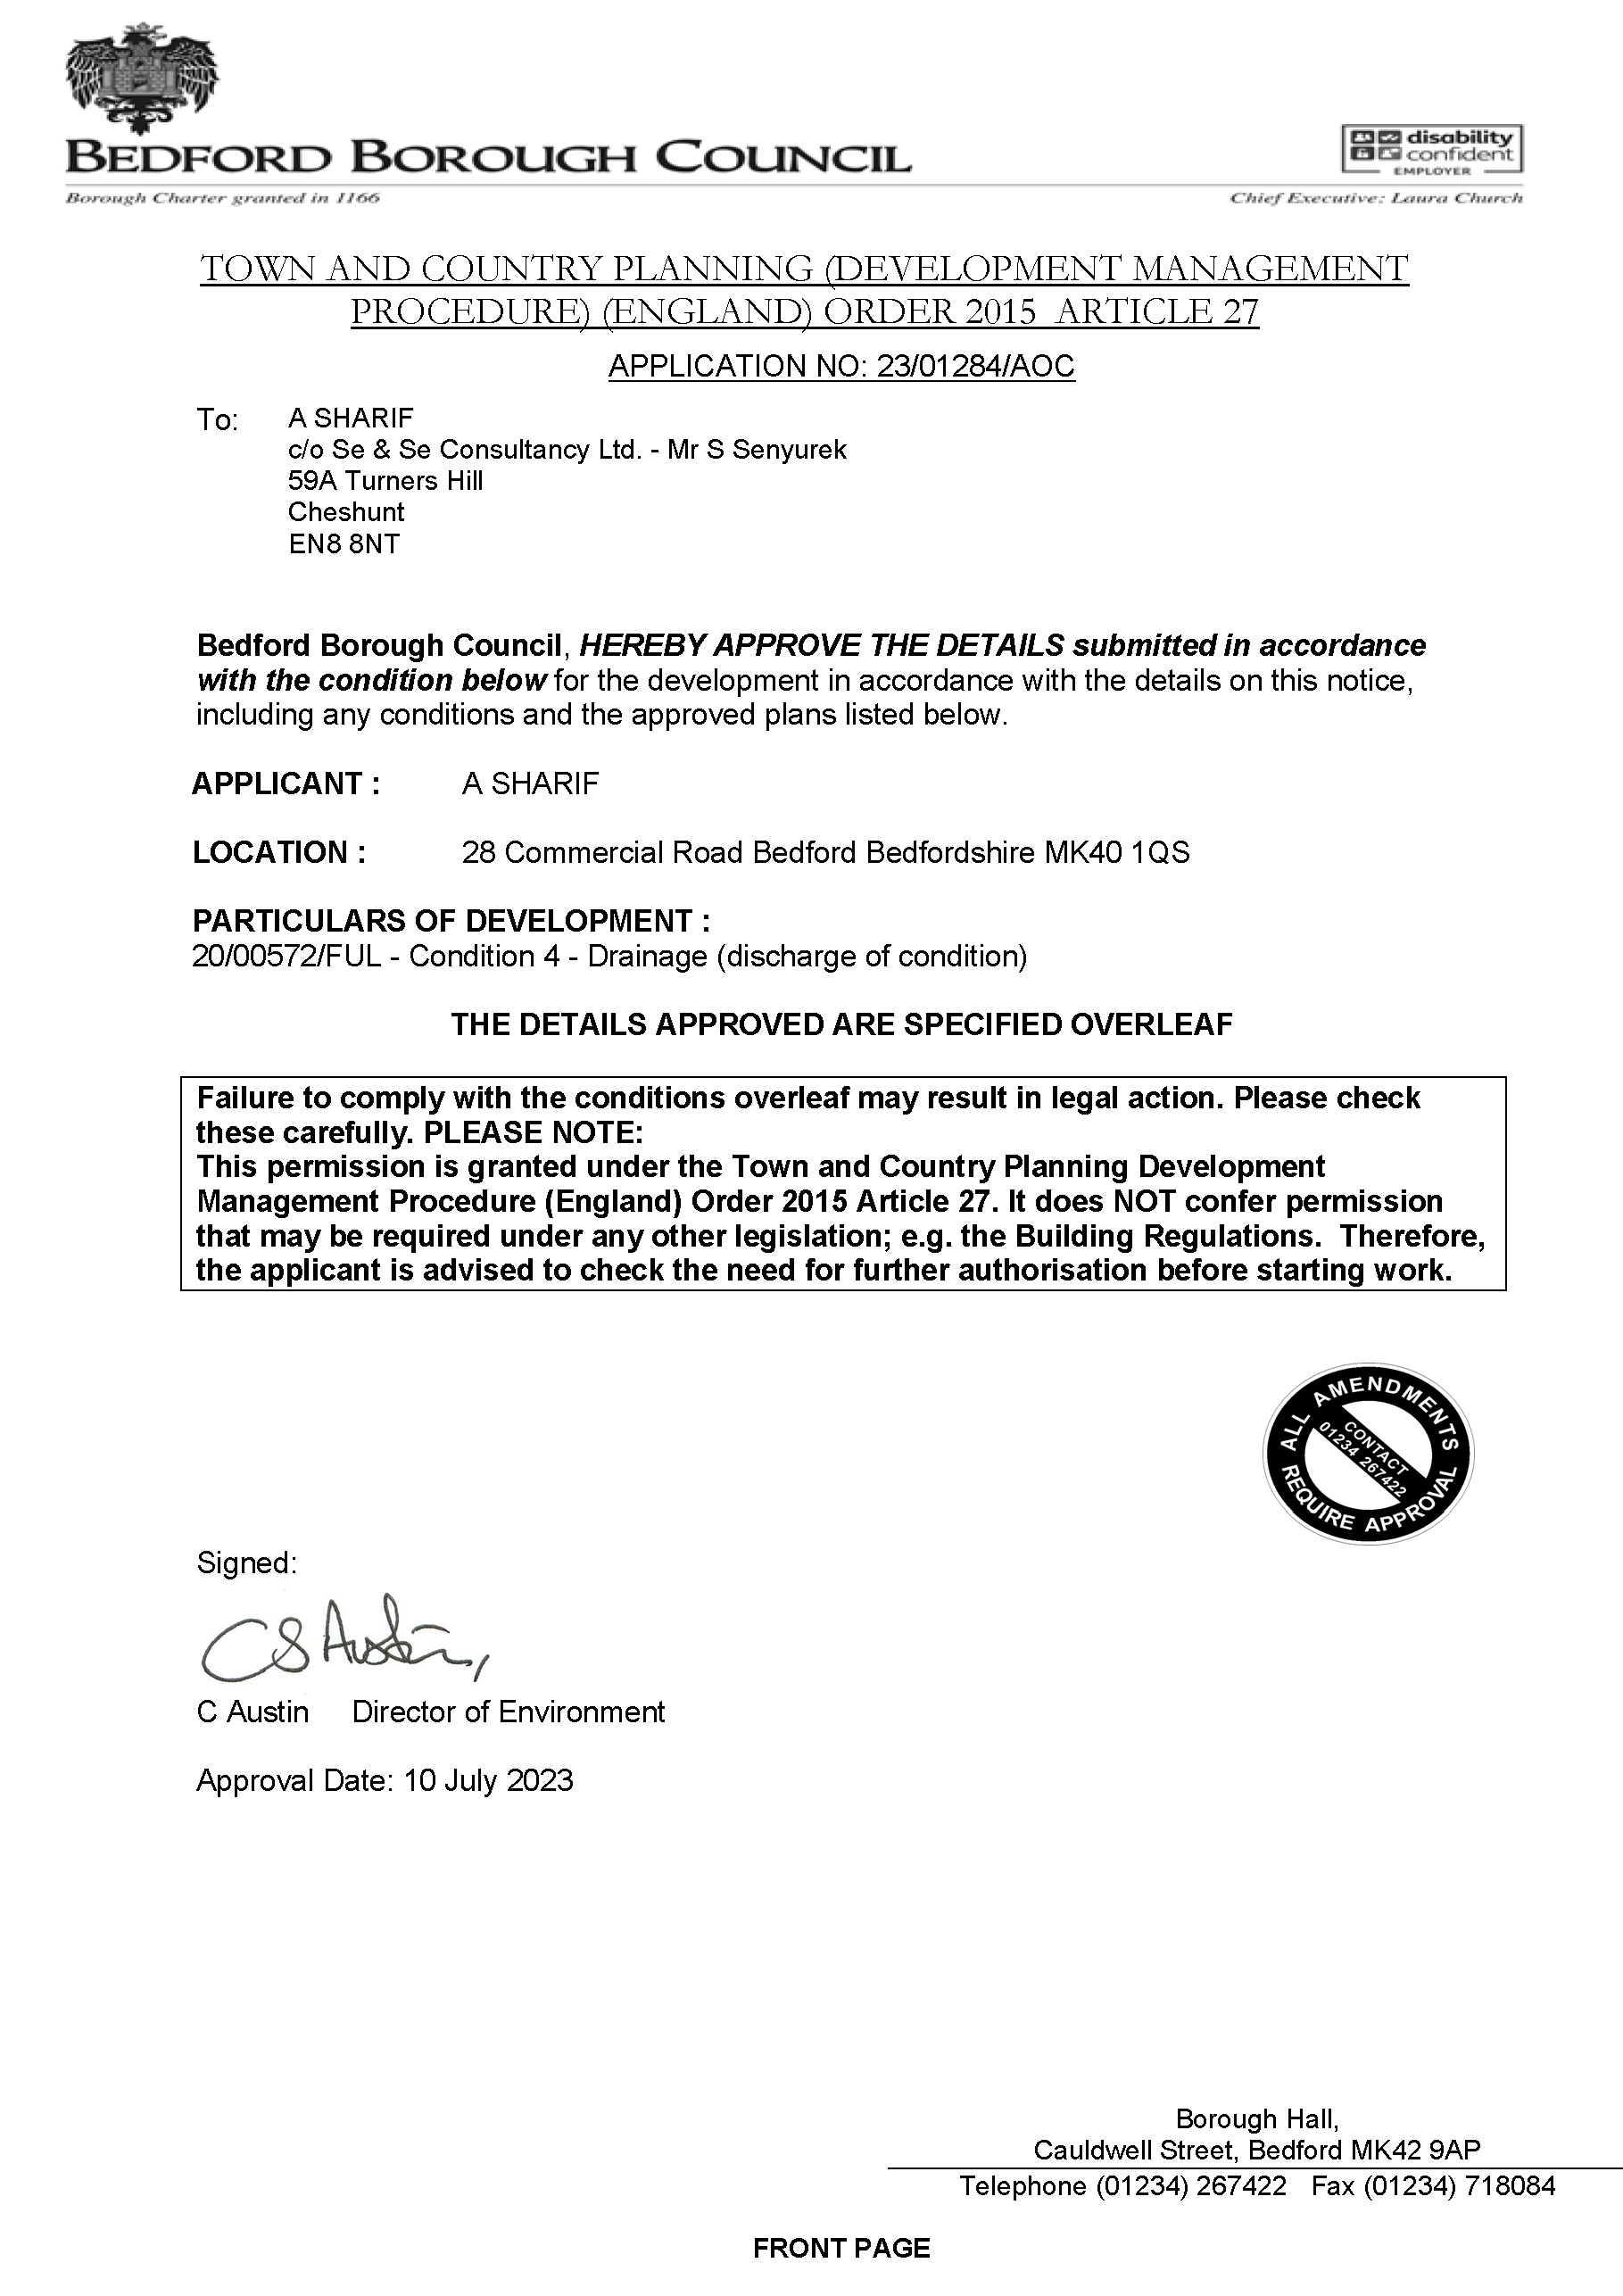 In the past, a previous application was submitted by someone else but unfortunately, it was rejected. Based on the feedback from previous application rejections, we have addressed the officer's concerns and supplied the requested information in our application. This application includes comprehensive details about the location and full details of the drainage system, including the oil/silt trap and tank that will deal with the waste water draining to the sewer. The application was Granted Permission.